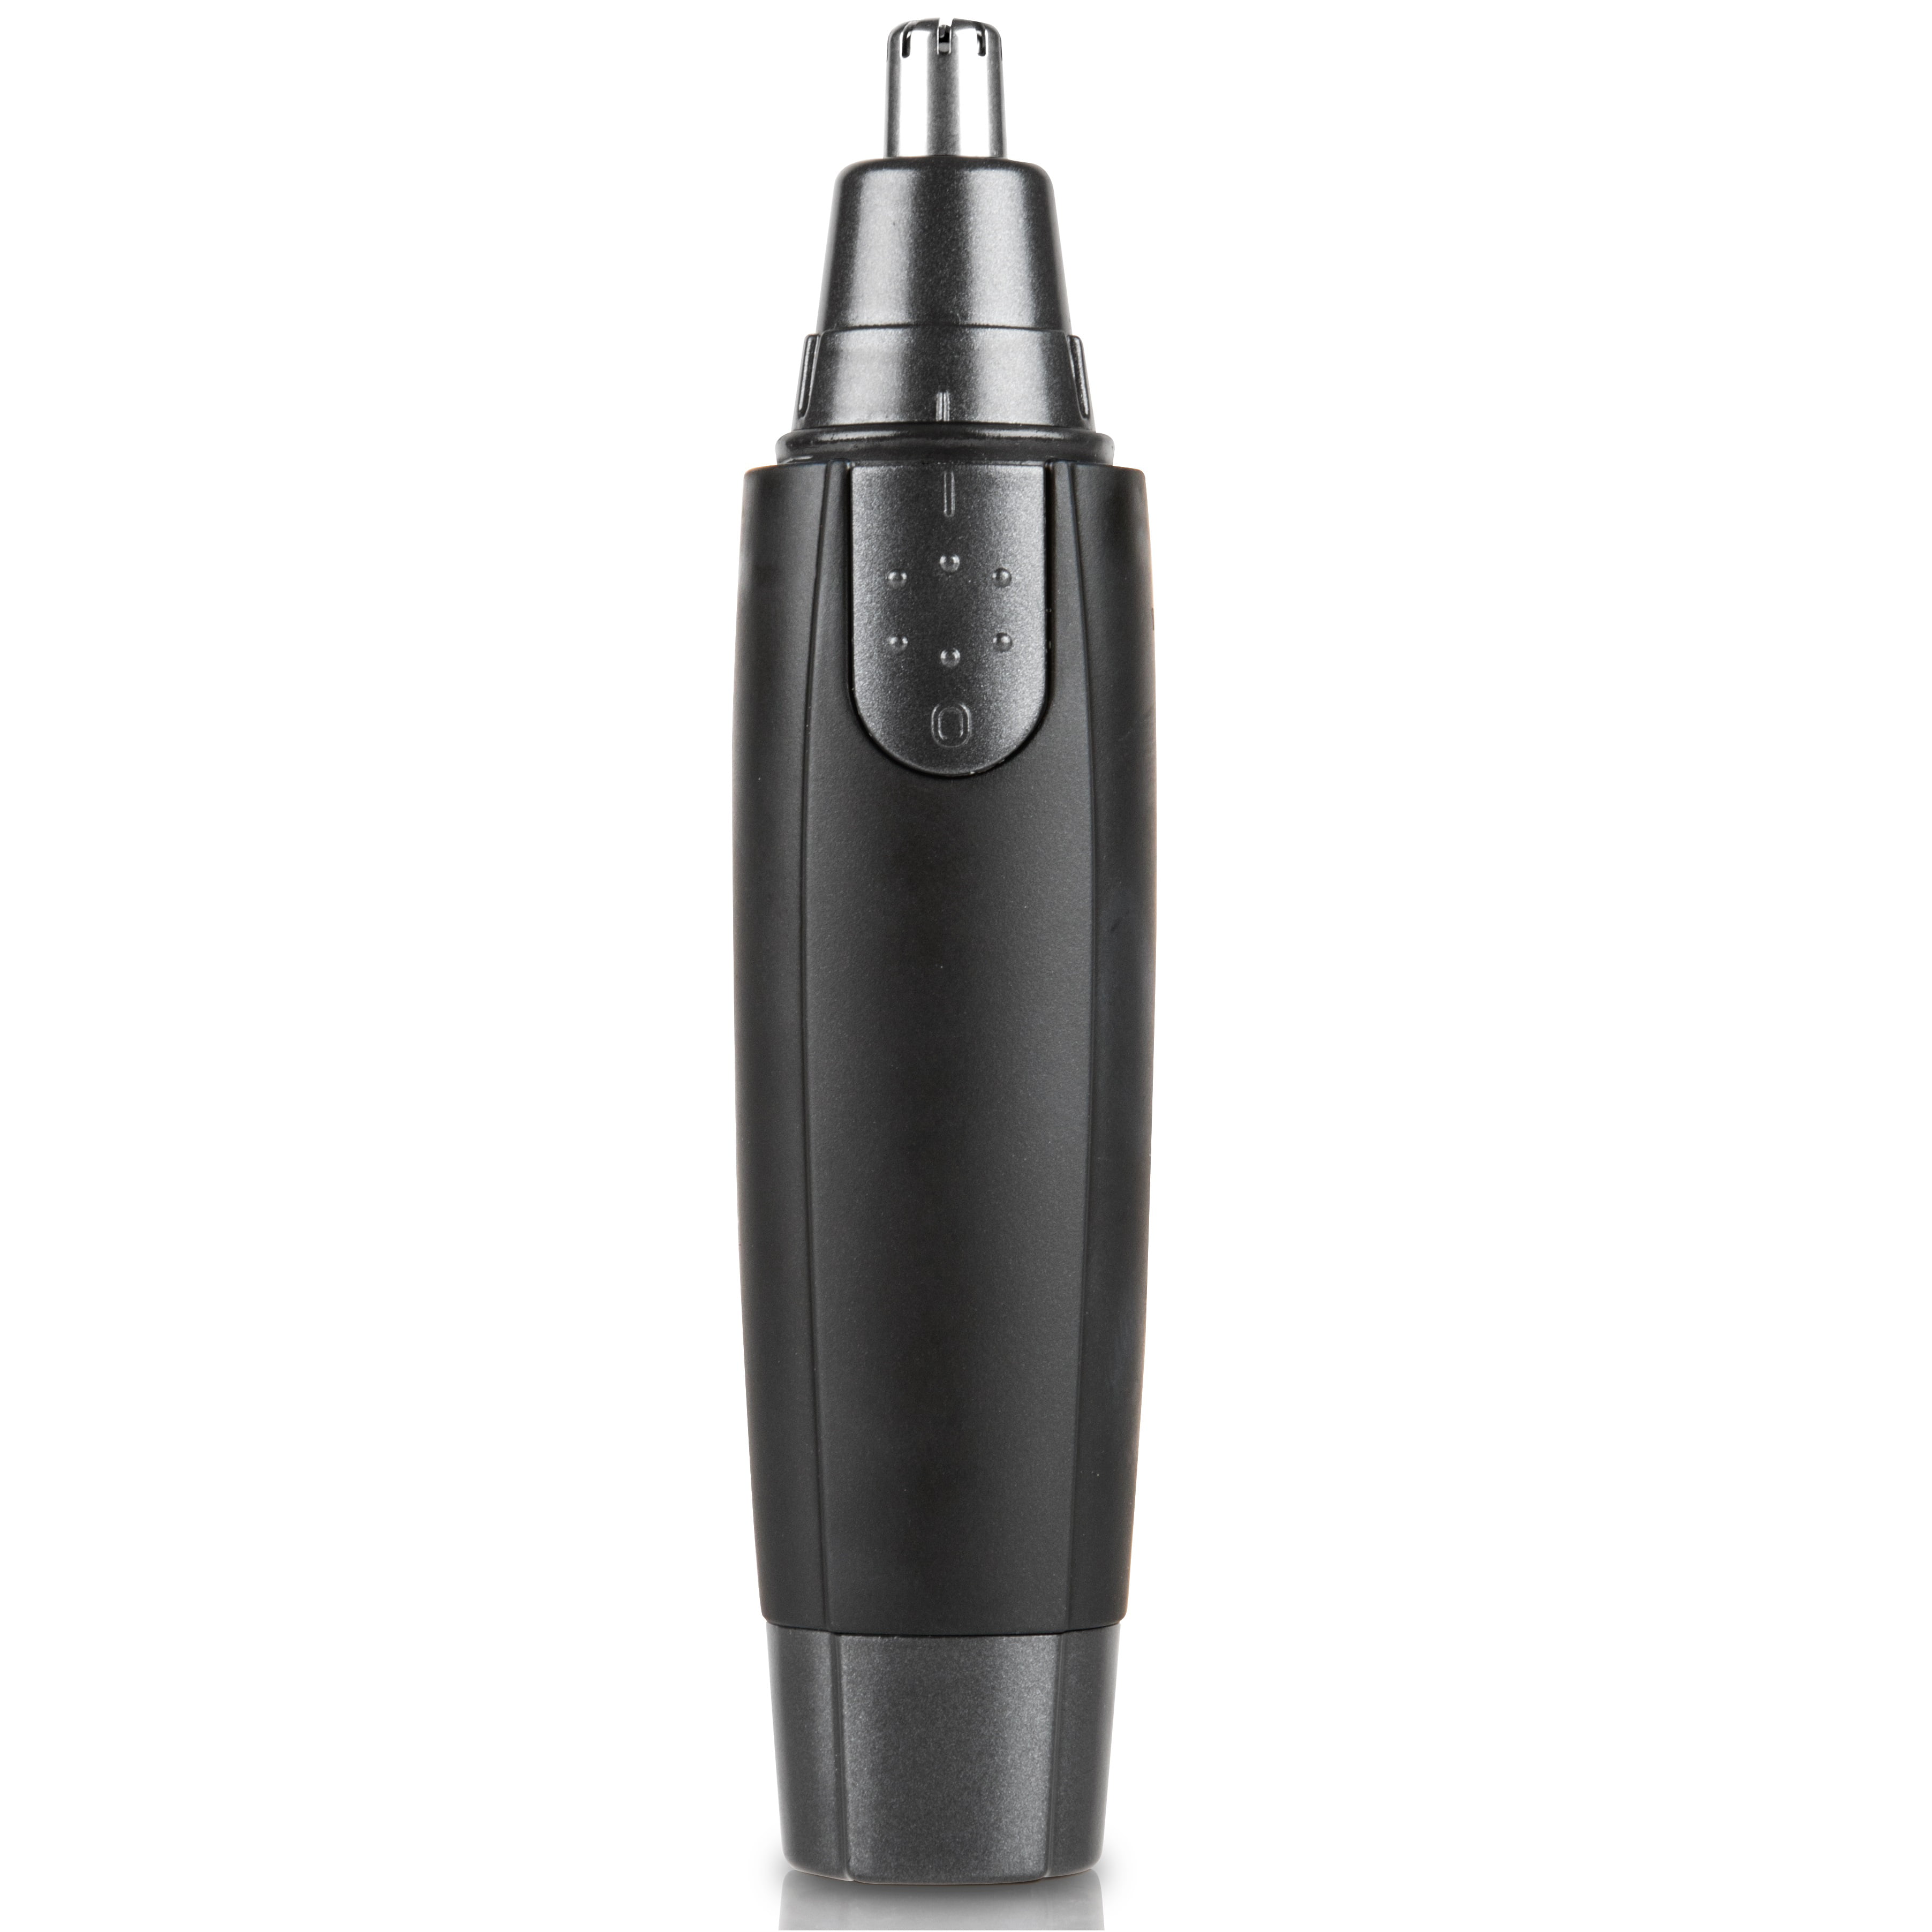 ear and nose hair trimmers